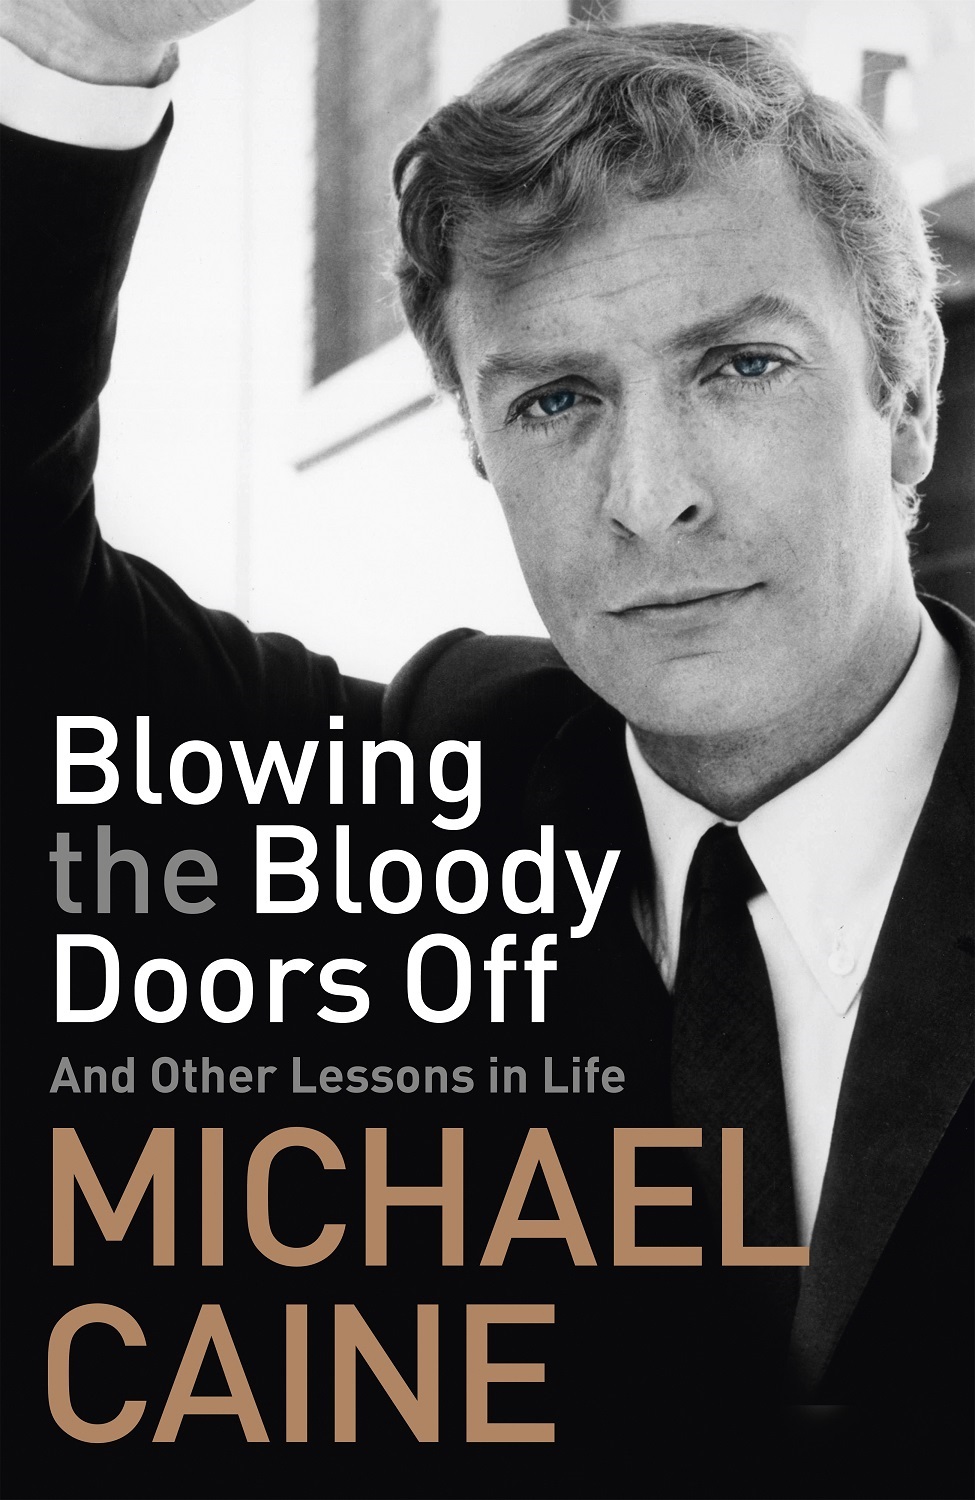 Michael Caine - Blow the Bloody Doors Off